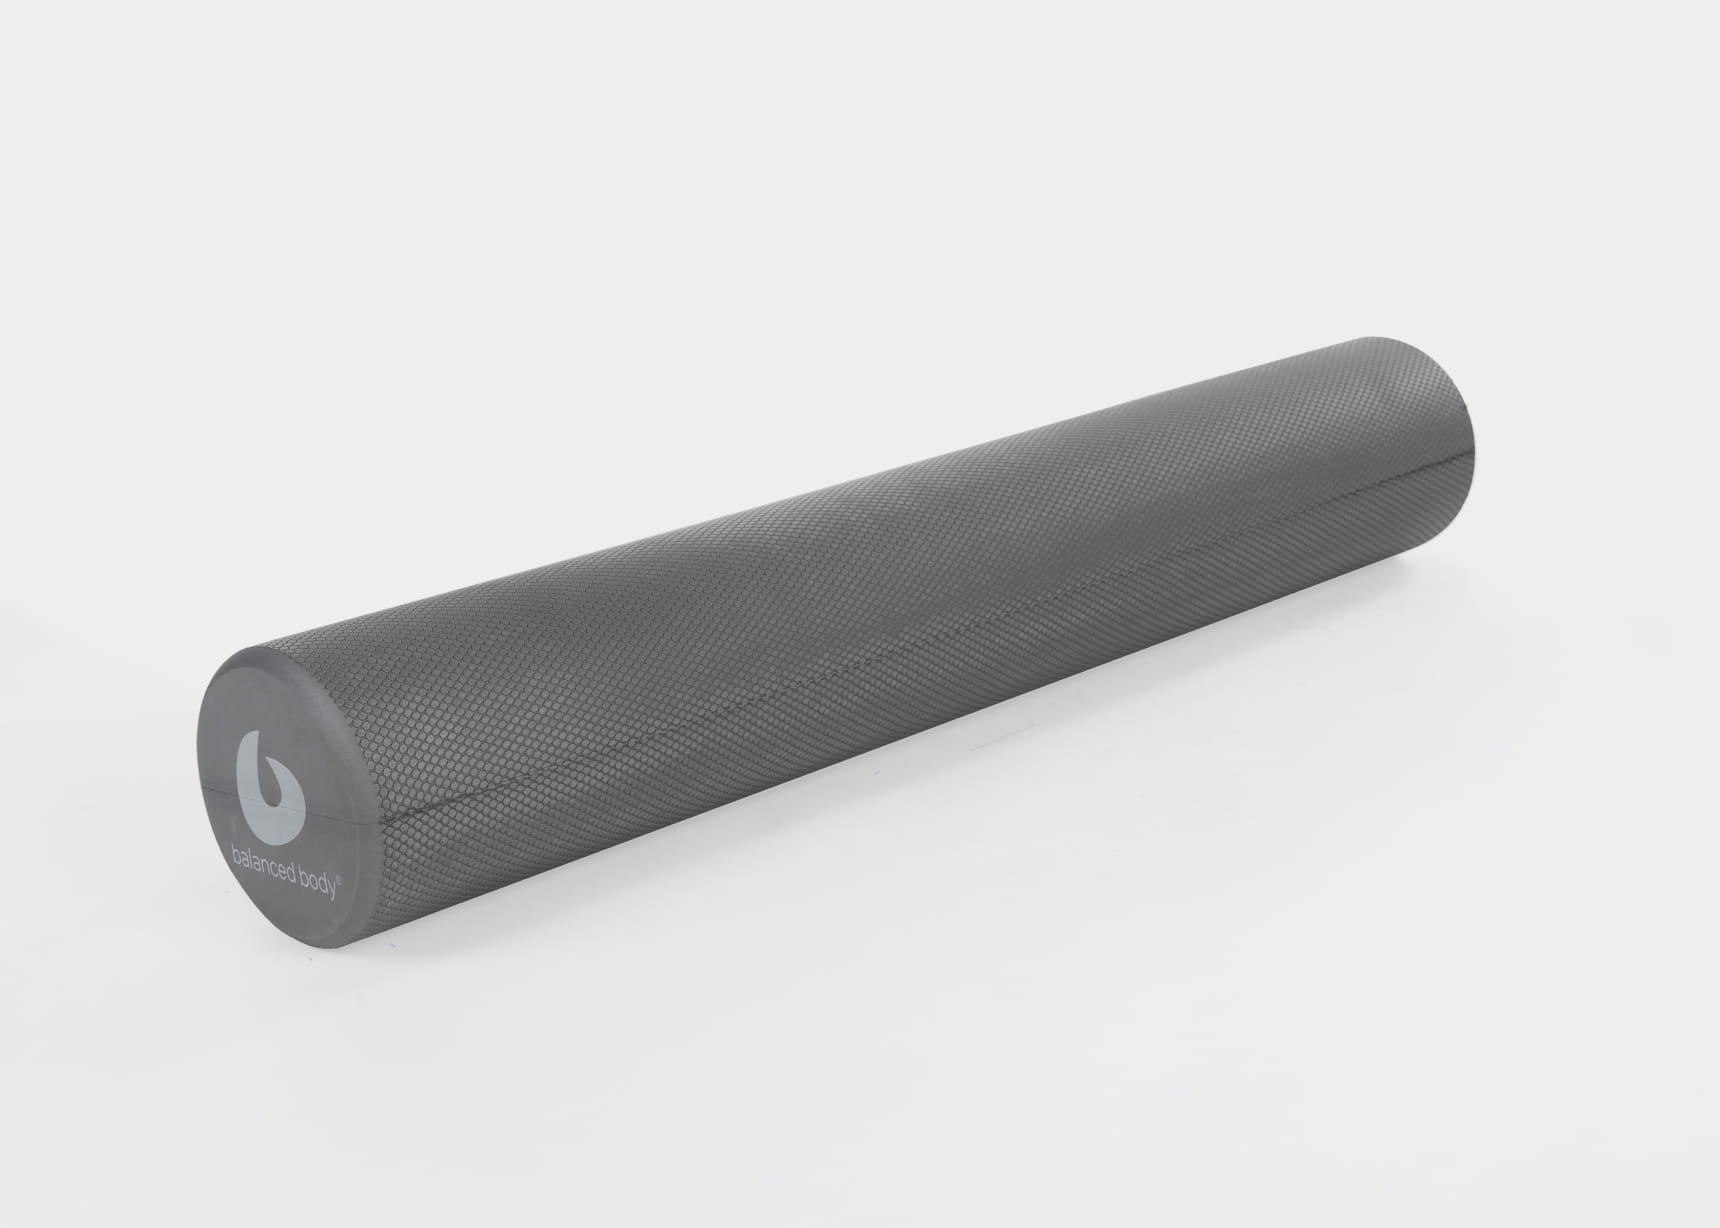 Foam Roller for Pilates - An Introduction To Pilates Small Props